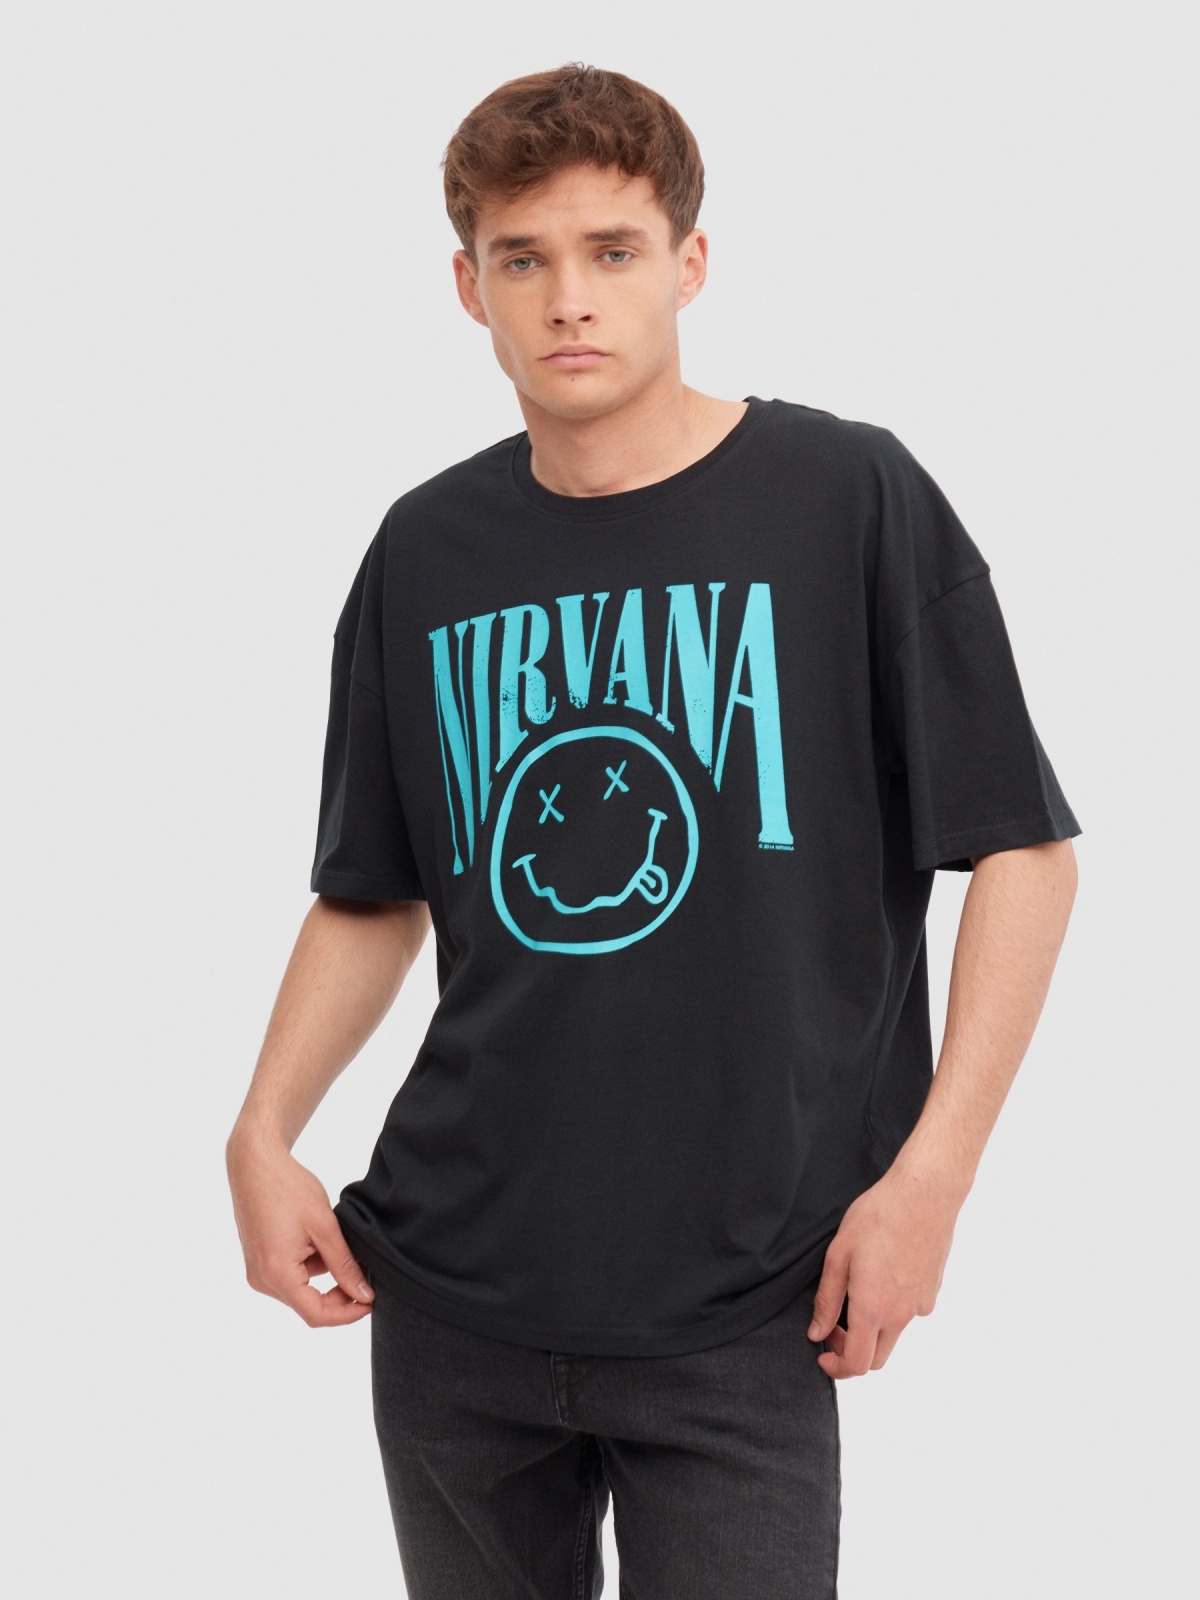 Nirvana t-shirt black middle front view